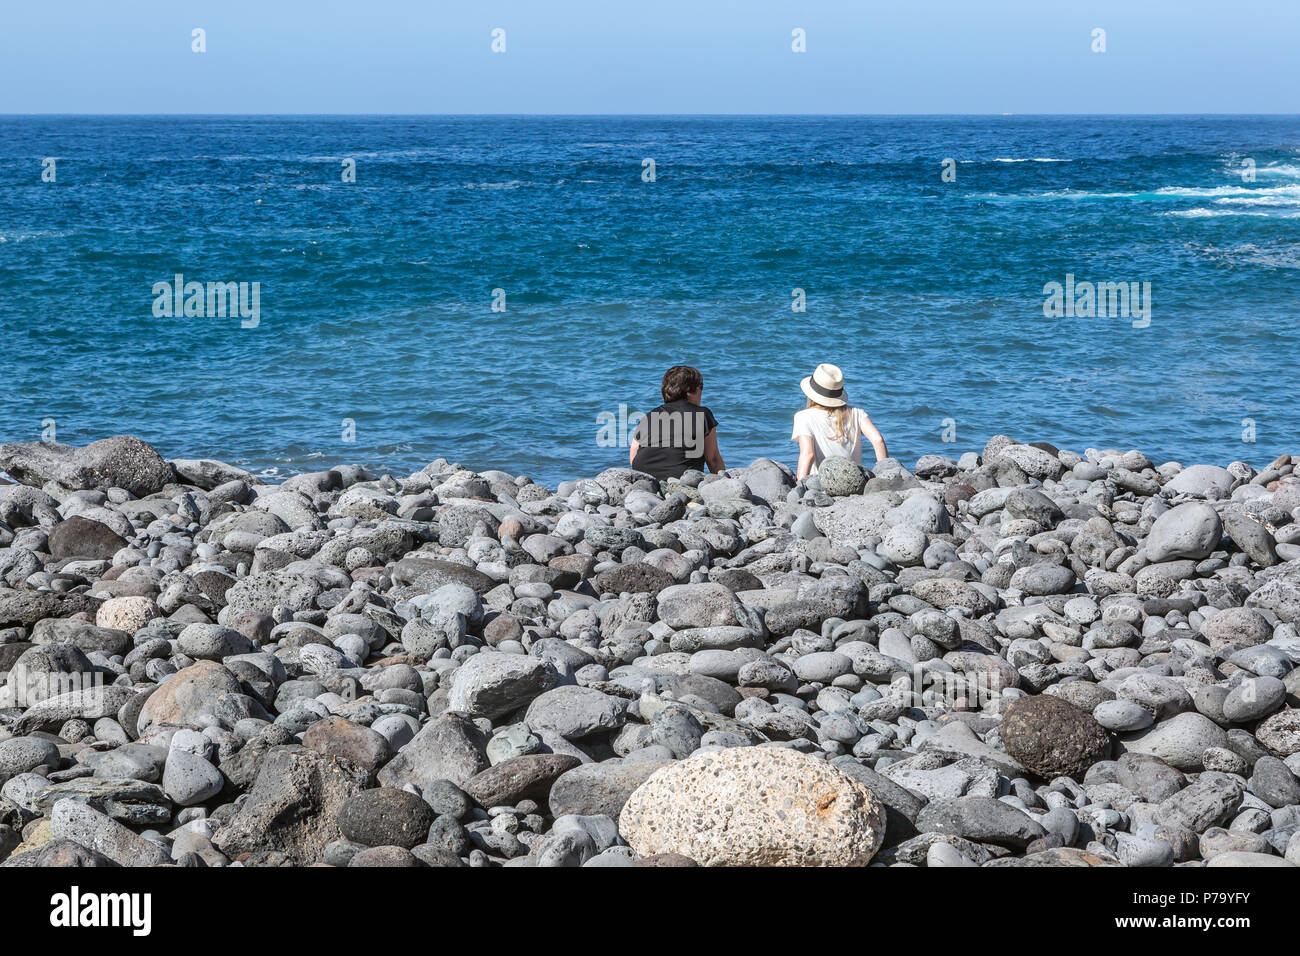 A rear view of a Mother and Daughter sitting on a pebbled beach looking towards the North Atlantic Ocean. Tenerife, Canary Islands. Stock Photo